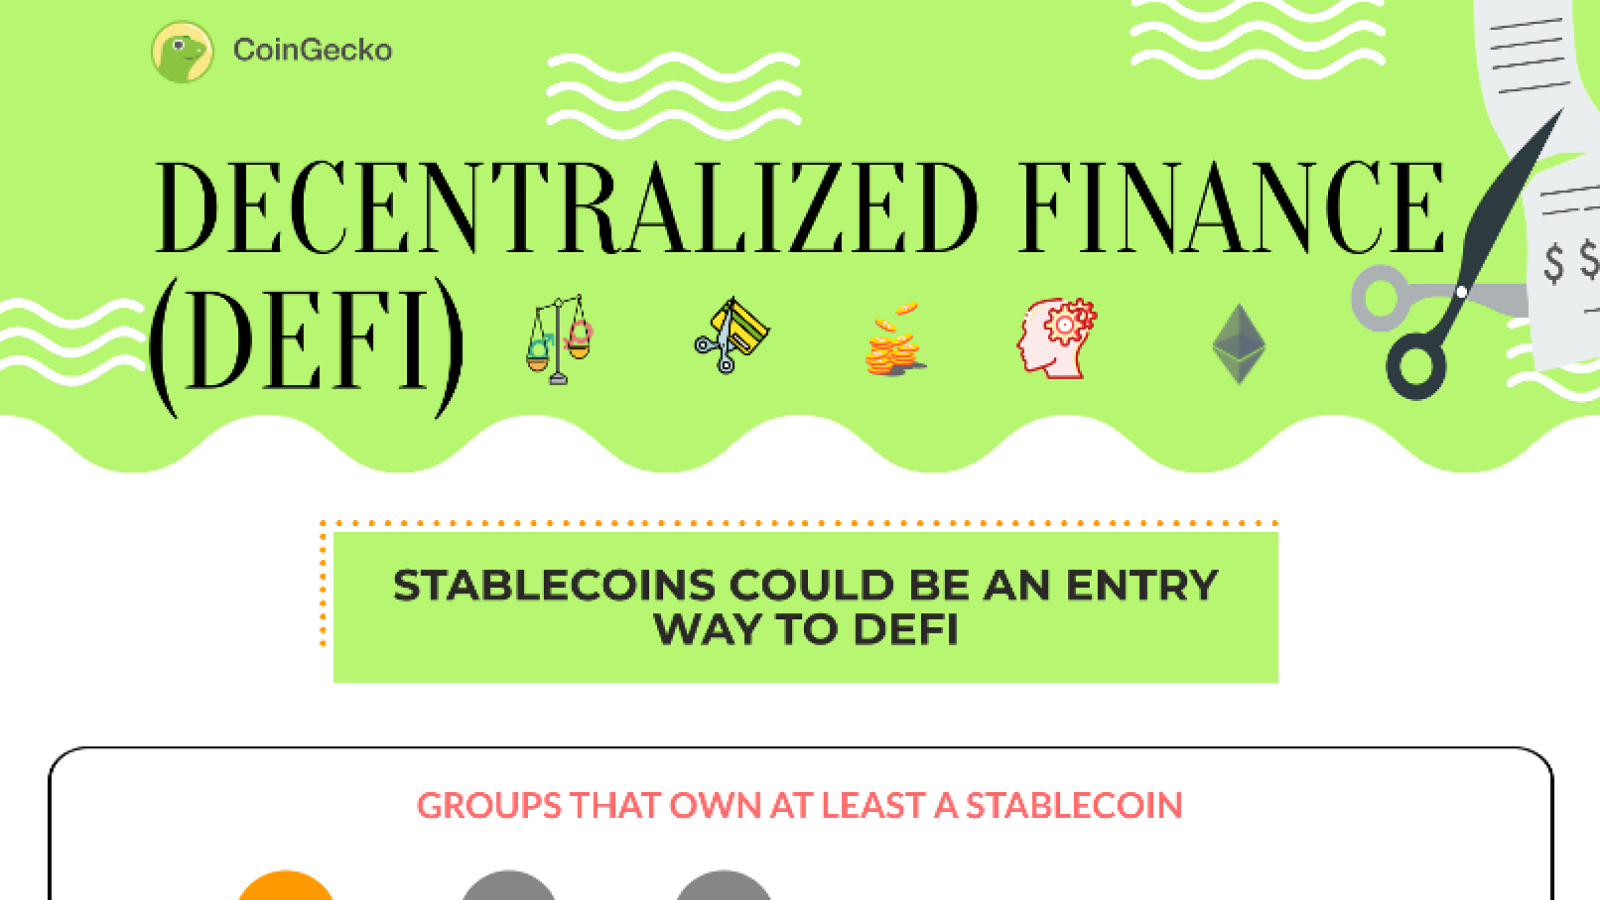 Stablecoins ownership has a strong correlation to DeFi awareness